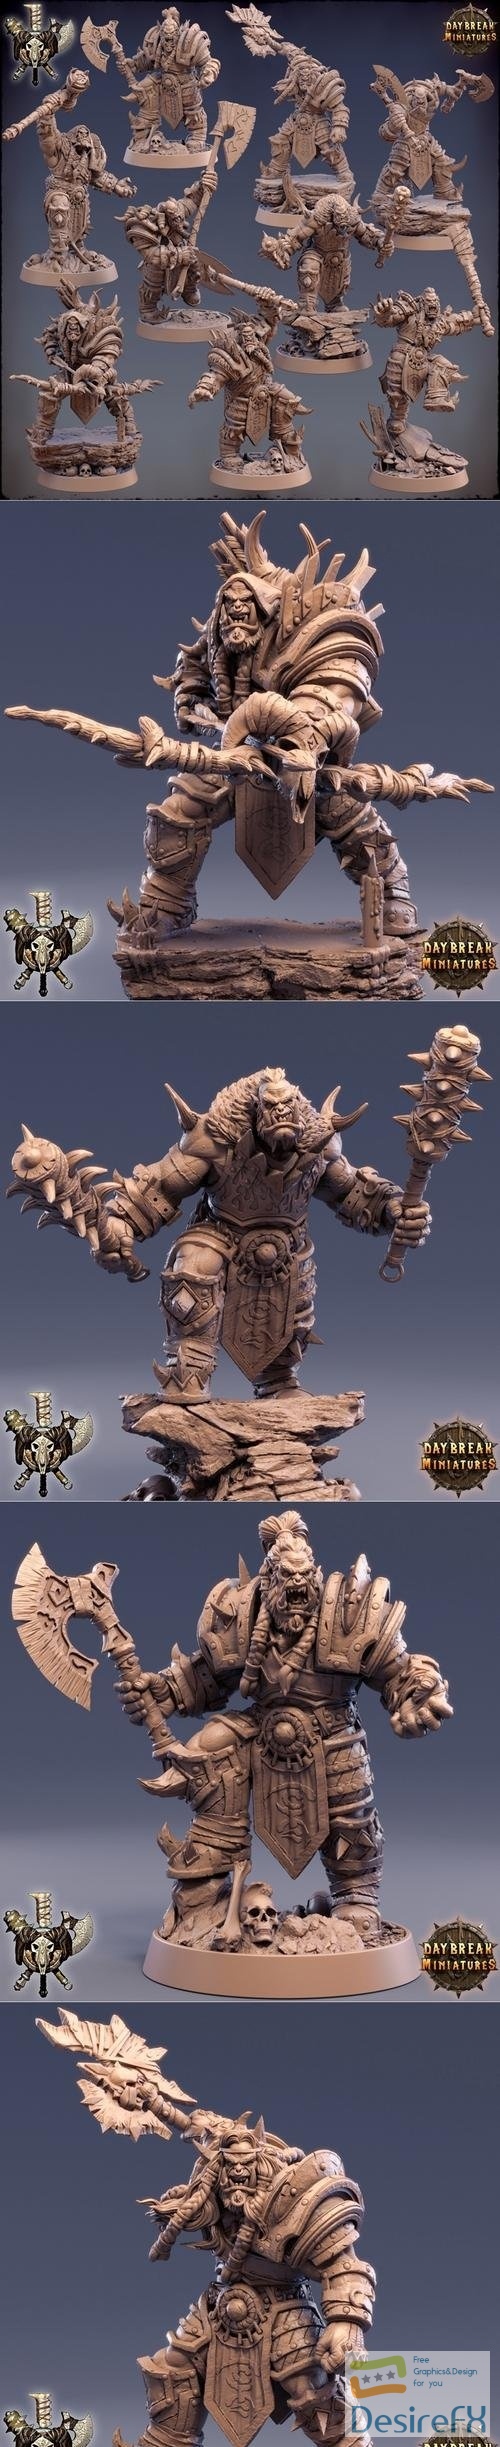 Daybreak Miniatures - The Powerbrokers of the Void – 3D Print